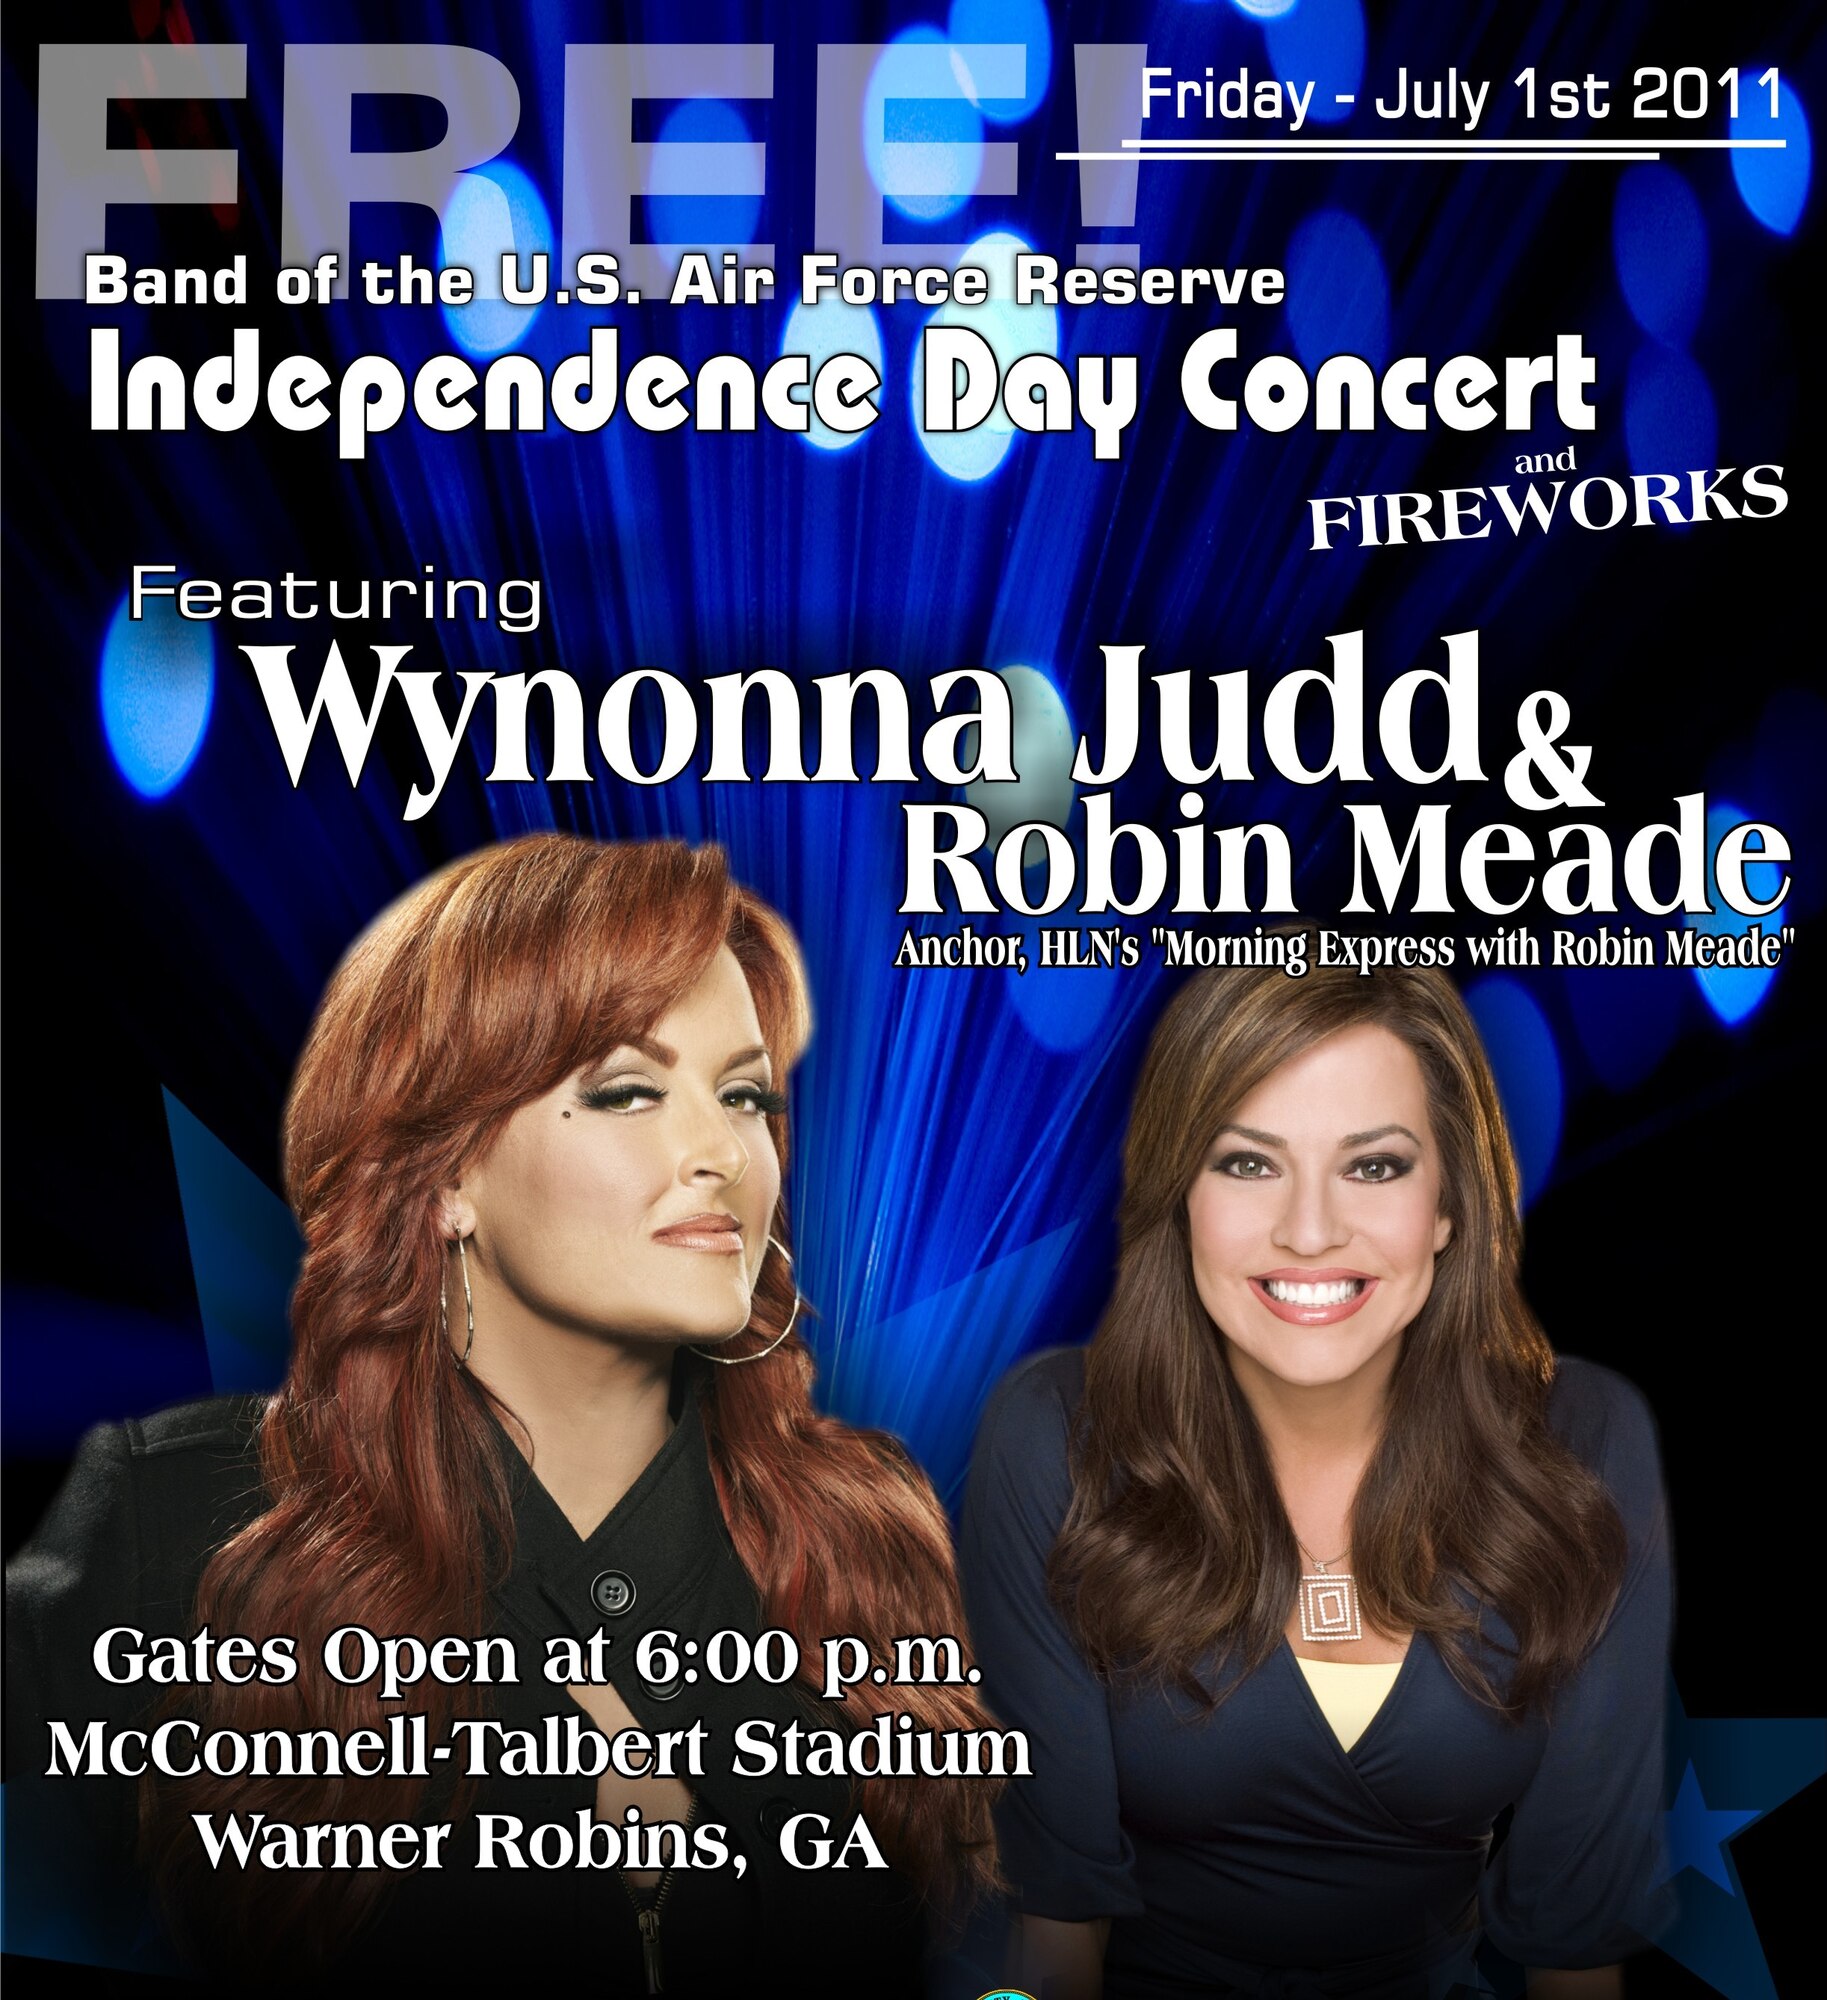 Five-time Grammy award winner Wynonna Judd and Robin Meade, anchor of Headline News' "Morning Express with Robin Meade" will perform with the Band of the U.S. Air Force Reserve on July 1 at this year's Independence Day Concert in Warner Robins. 

